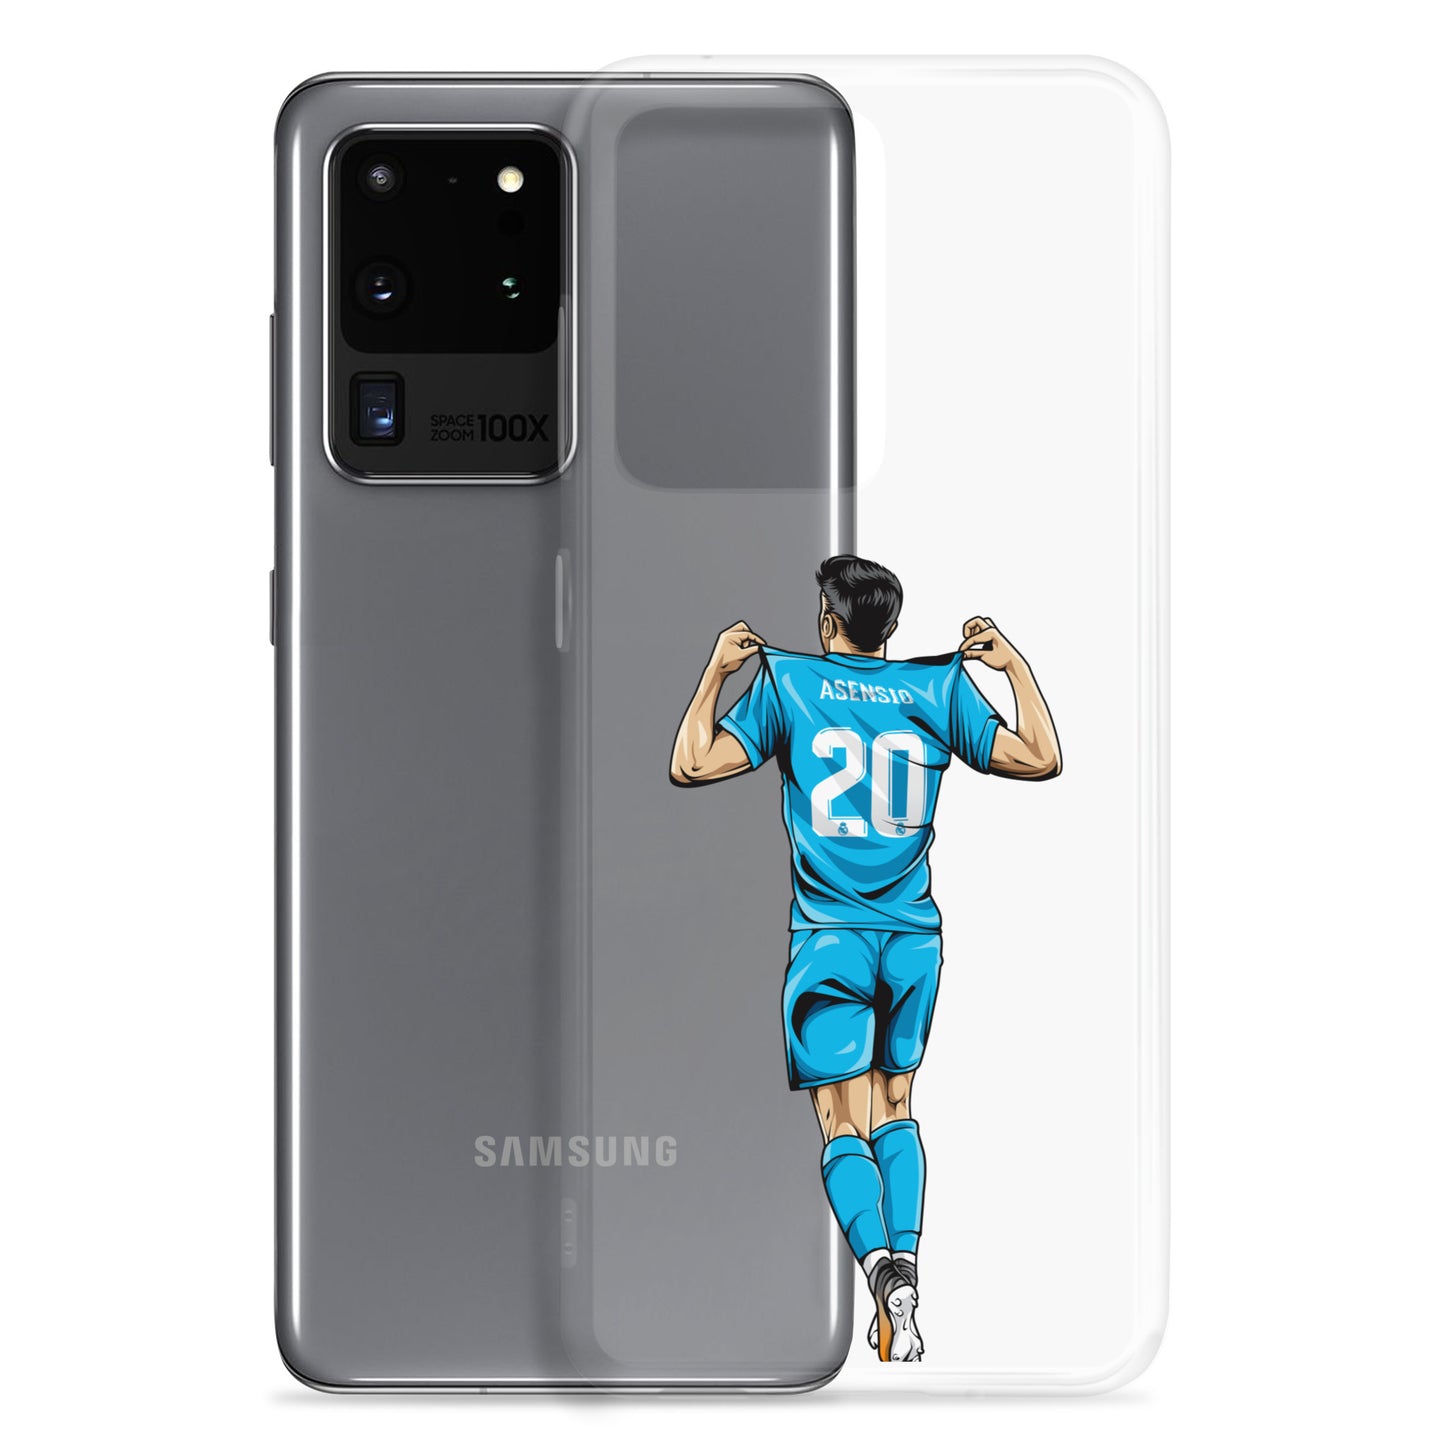 Asensio Madrid Clear Case for Samsung®